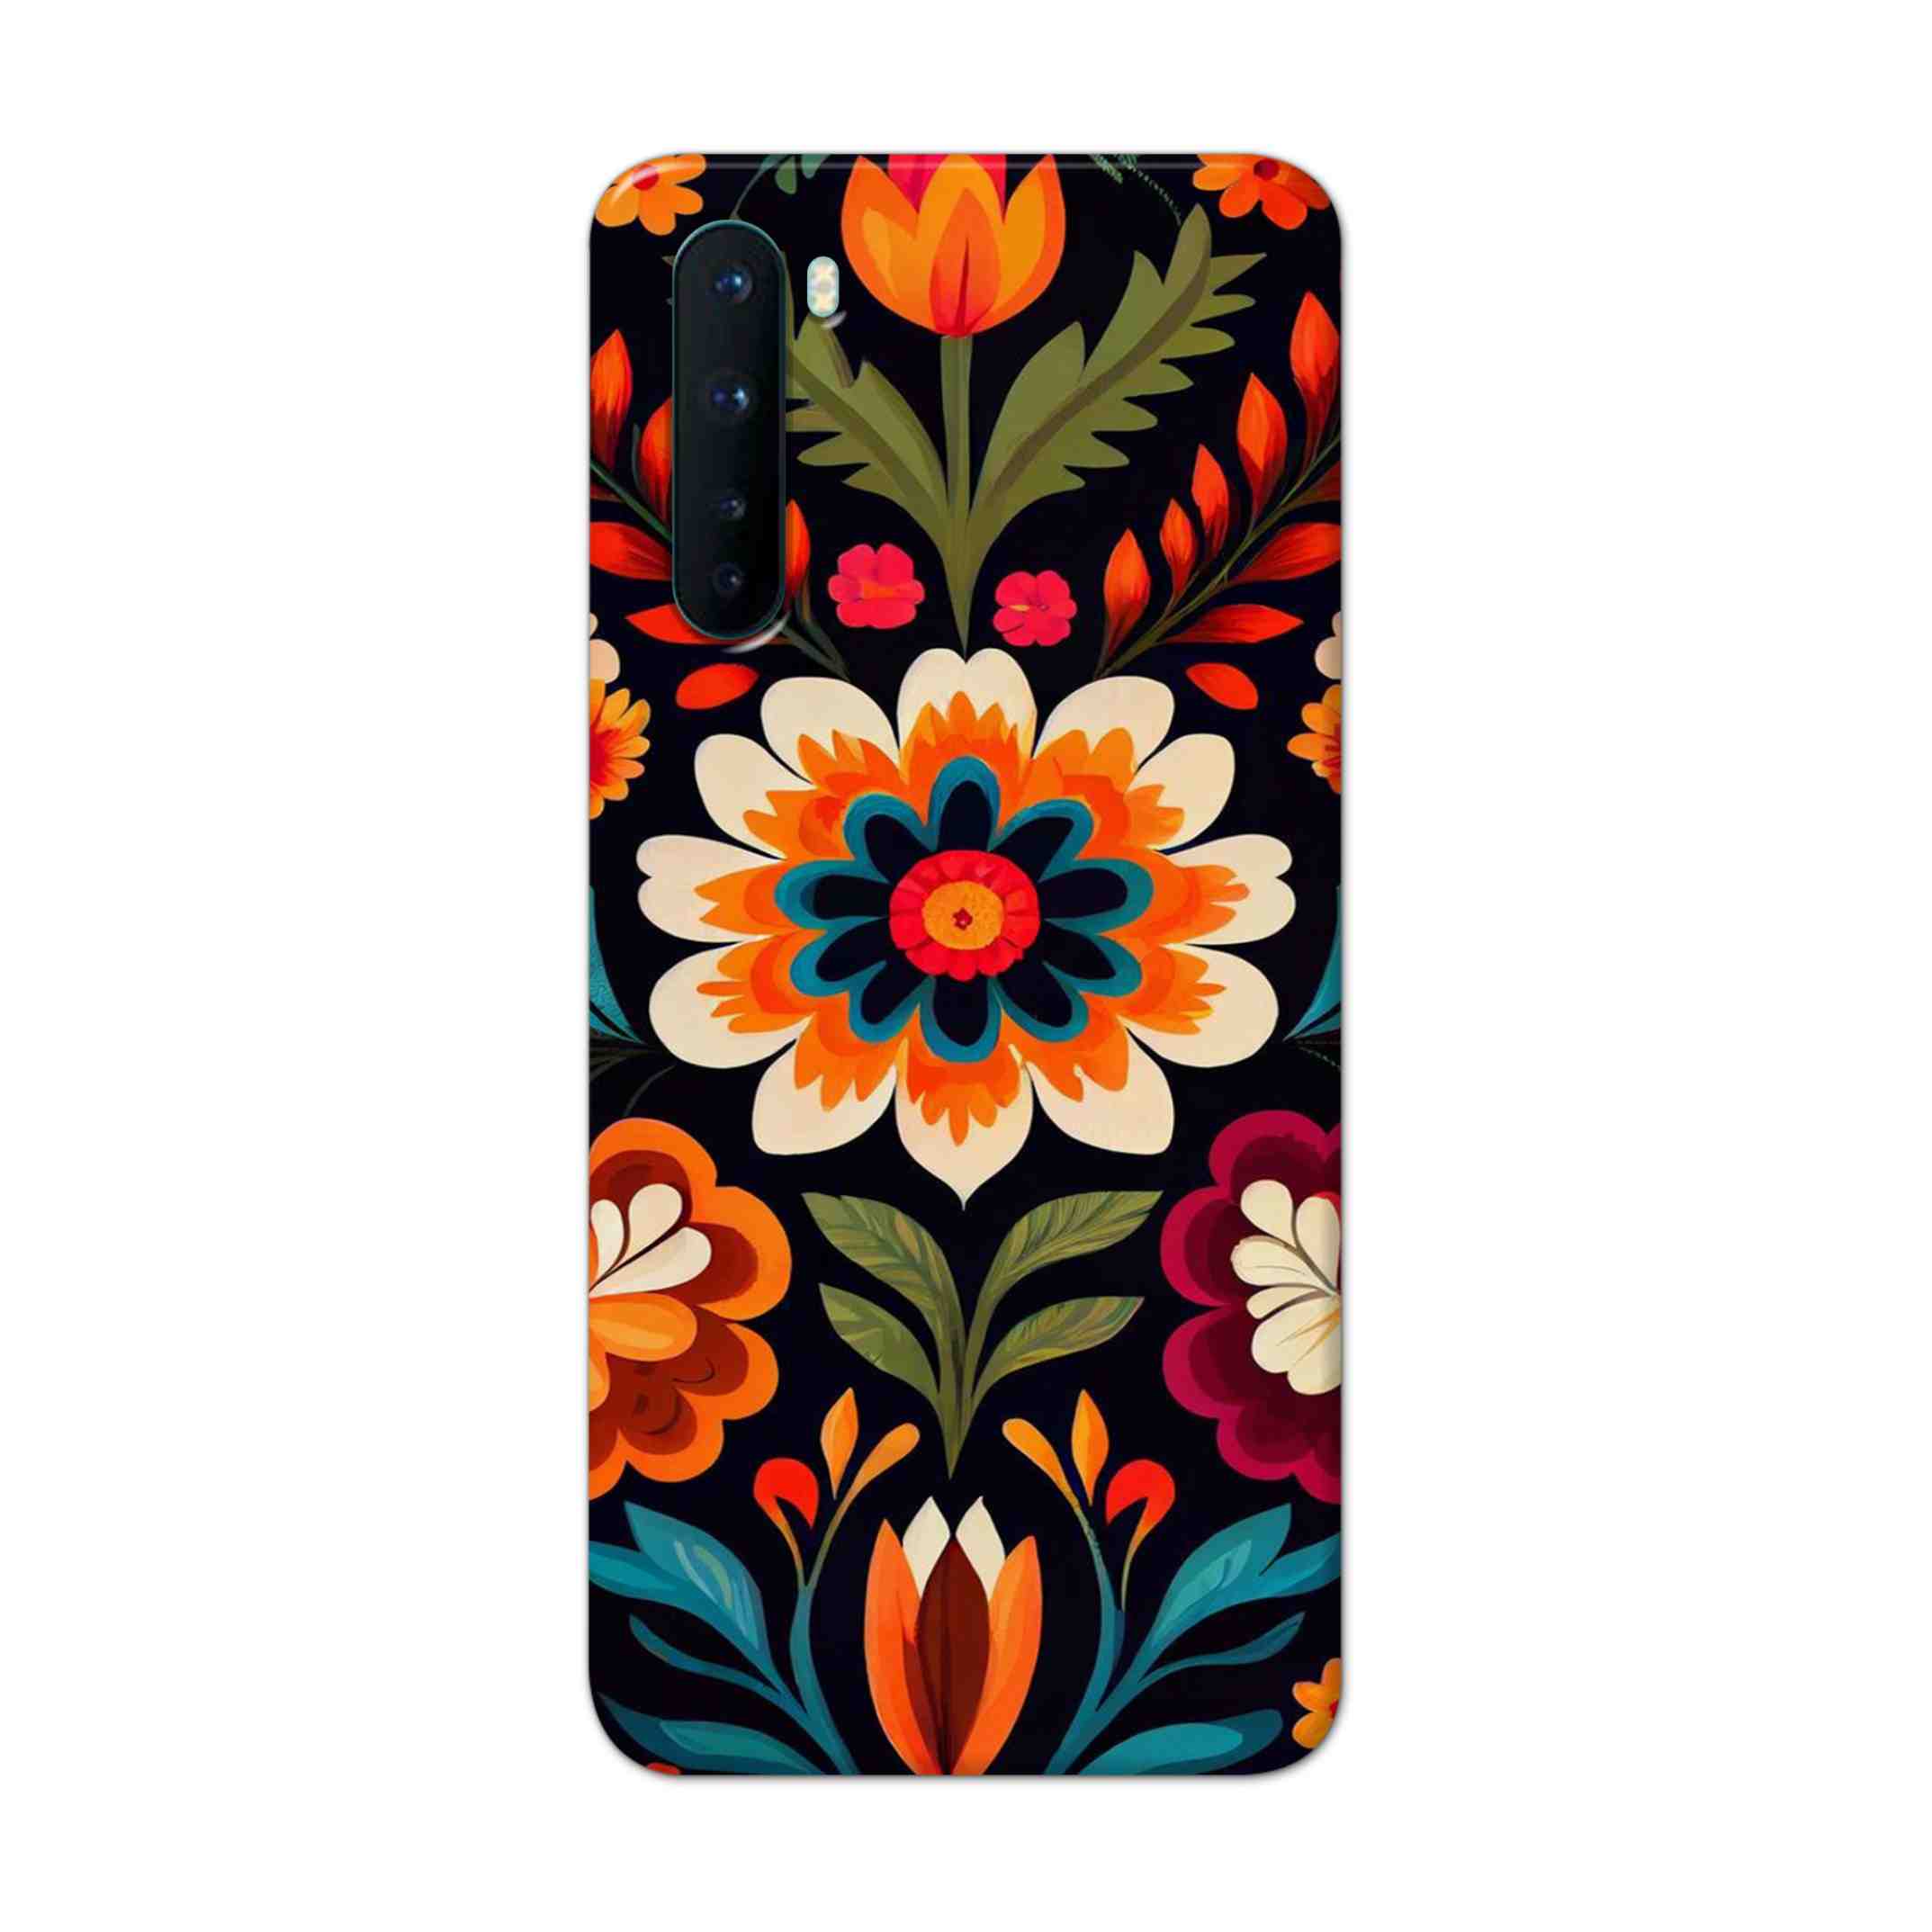 Buy Flower Hard Back Mobile Phone Case Cover For OnePlus Nord Online